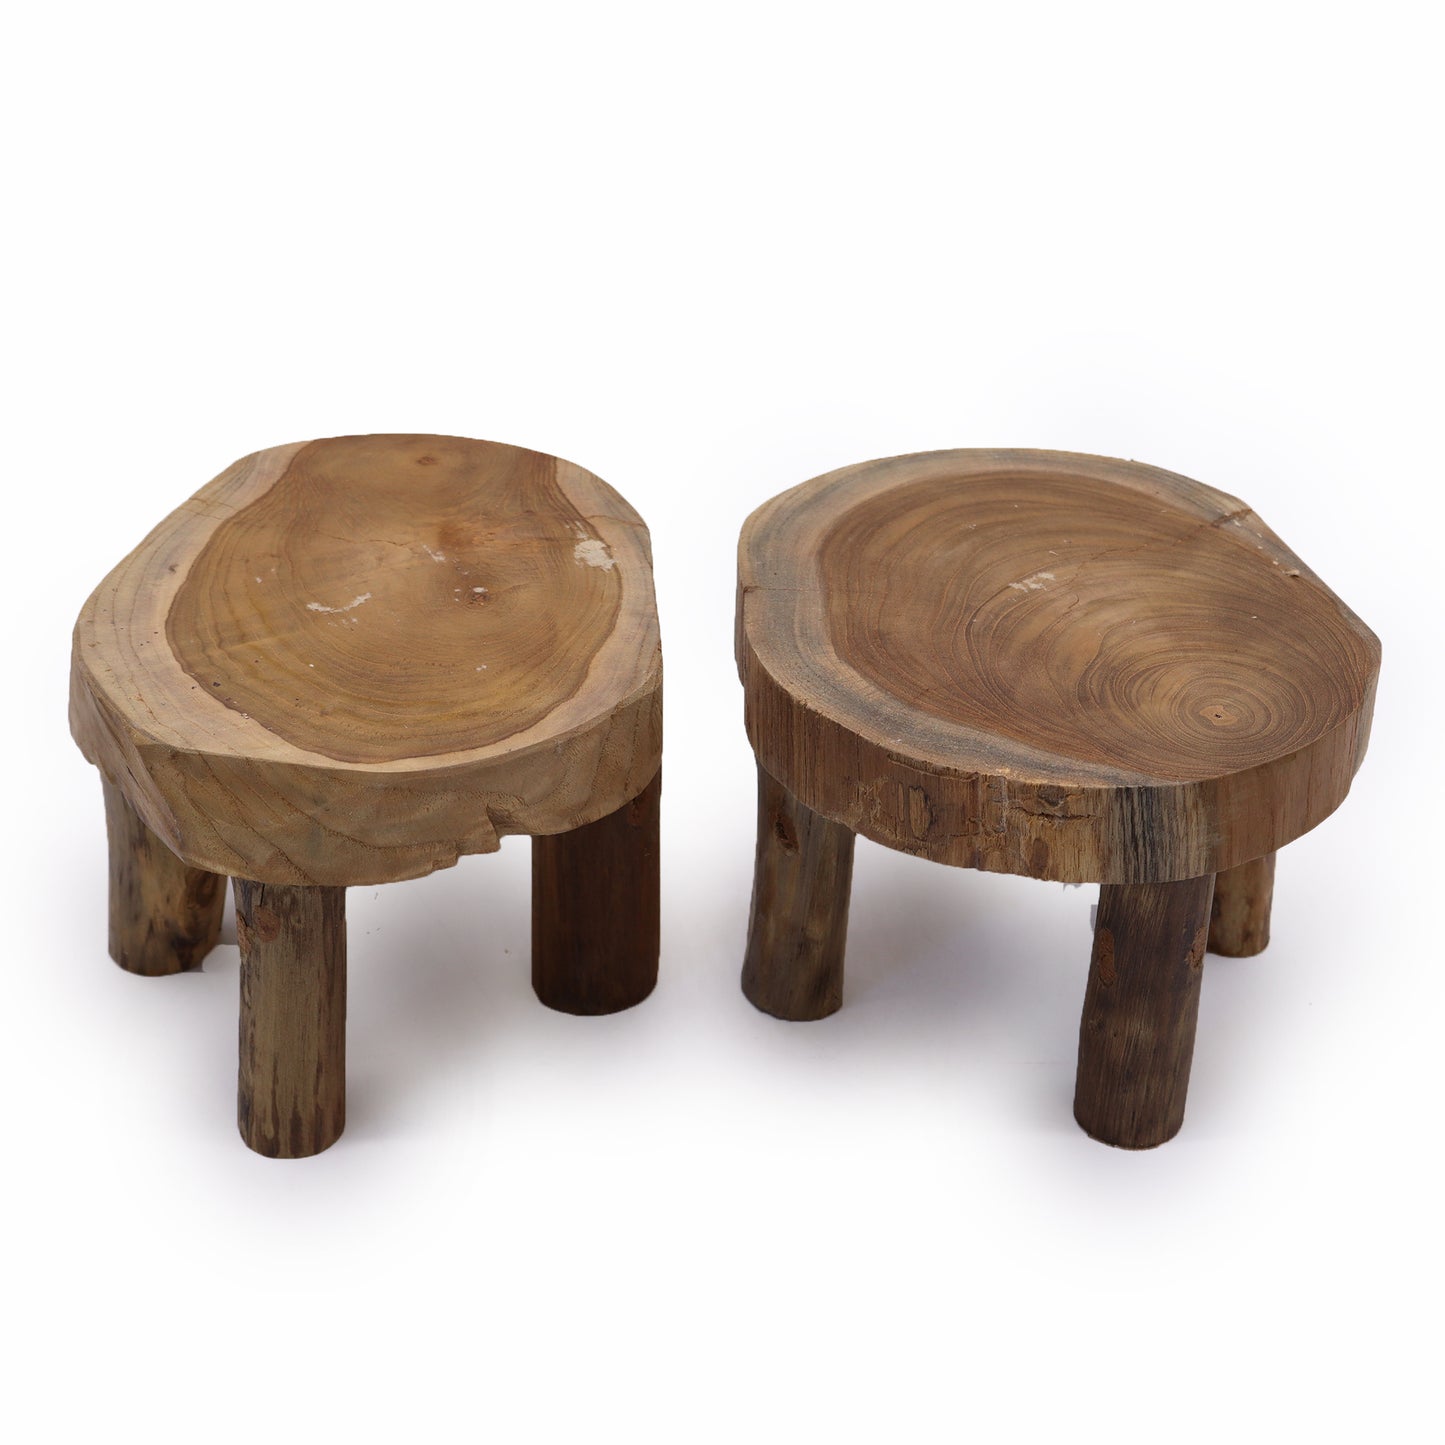 Medium size Pair of Recycled Teak Pad Display Stands - Width 27 x H15cm Lamp Tables - CasaFenix